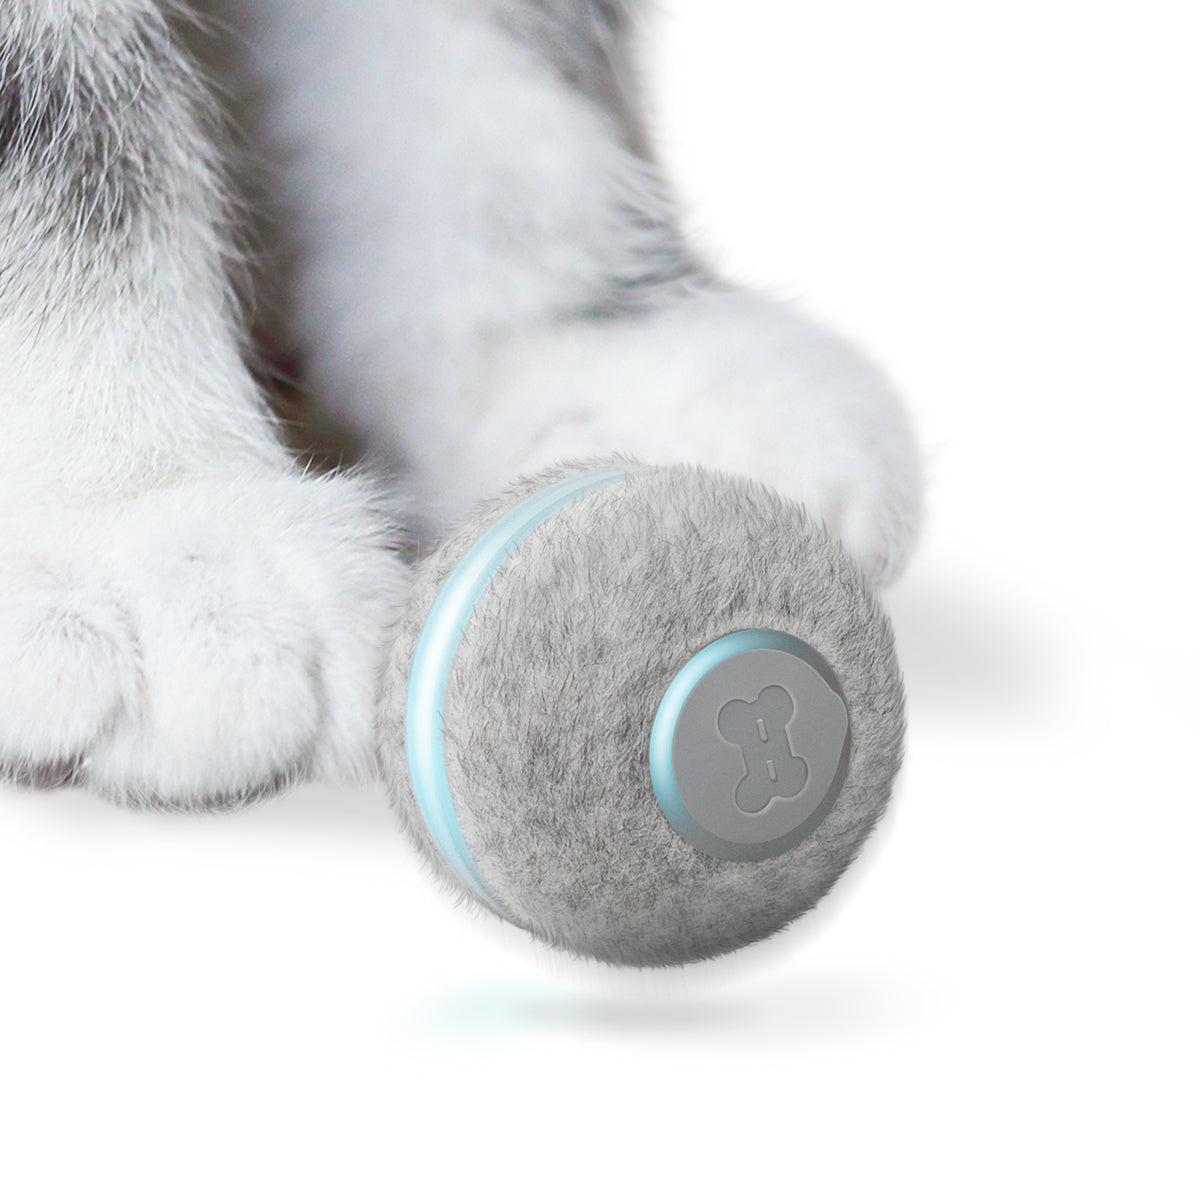 Cheerble Ball: Tiny Smart Ball for Your Cat's Entertainment